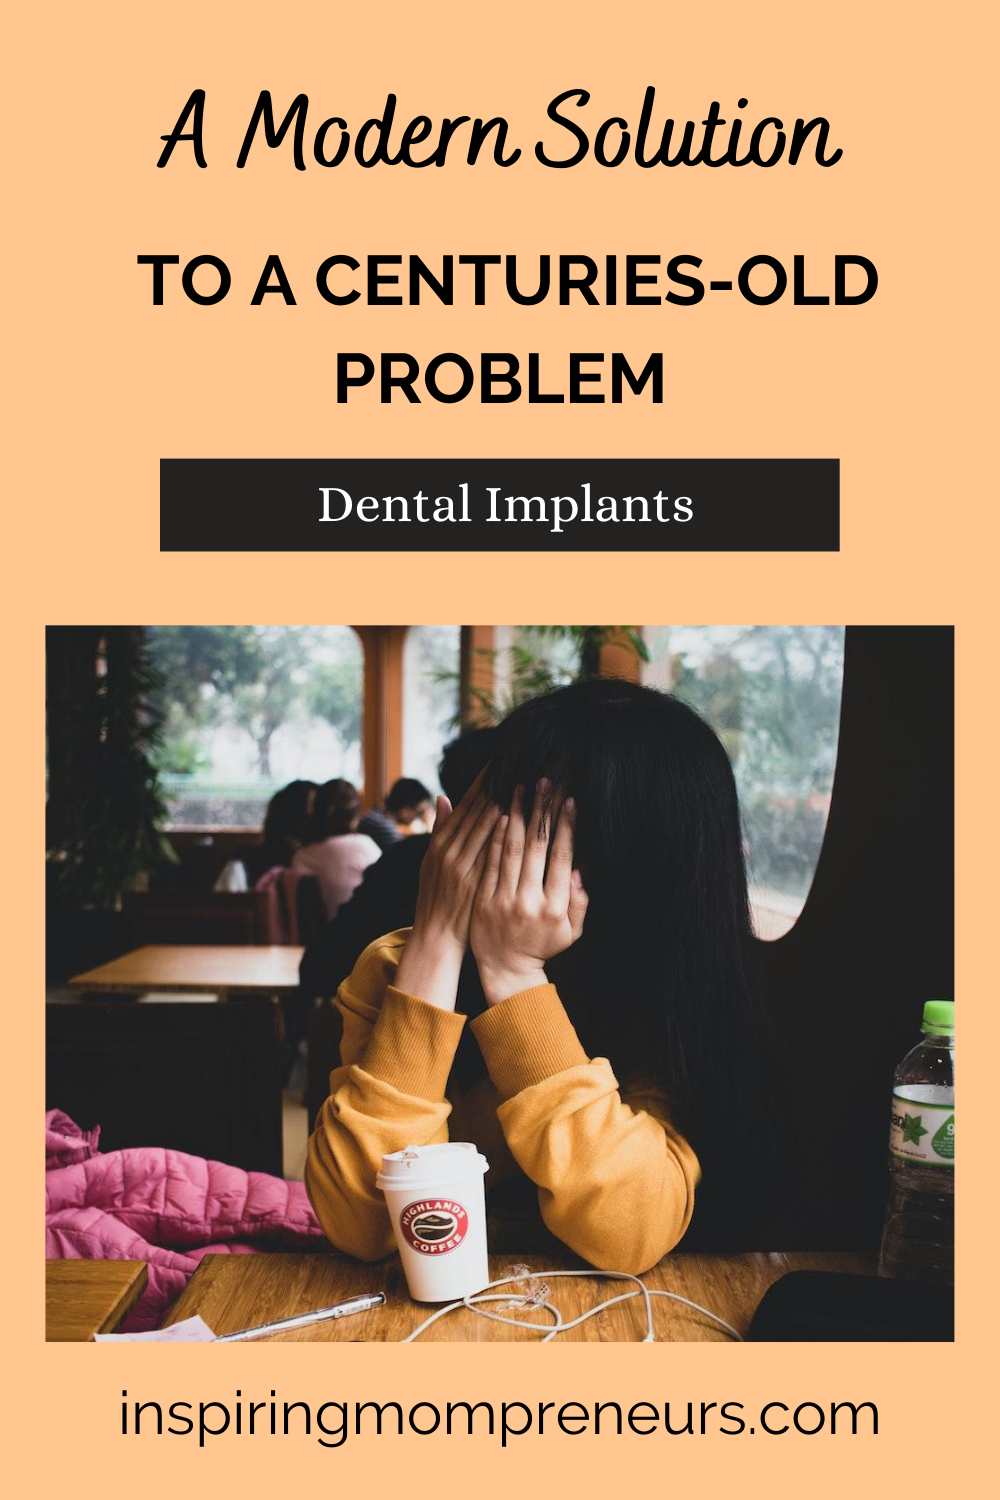 When you've lost a tooth, you may want to hide your head in embarrassment. Dental implants to the rescue - a modern solution to a centuries-old problem. 